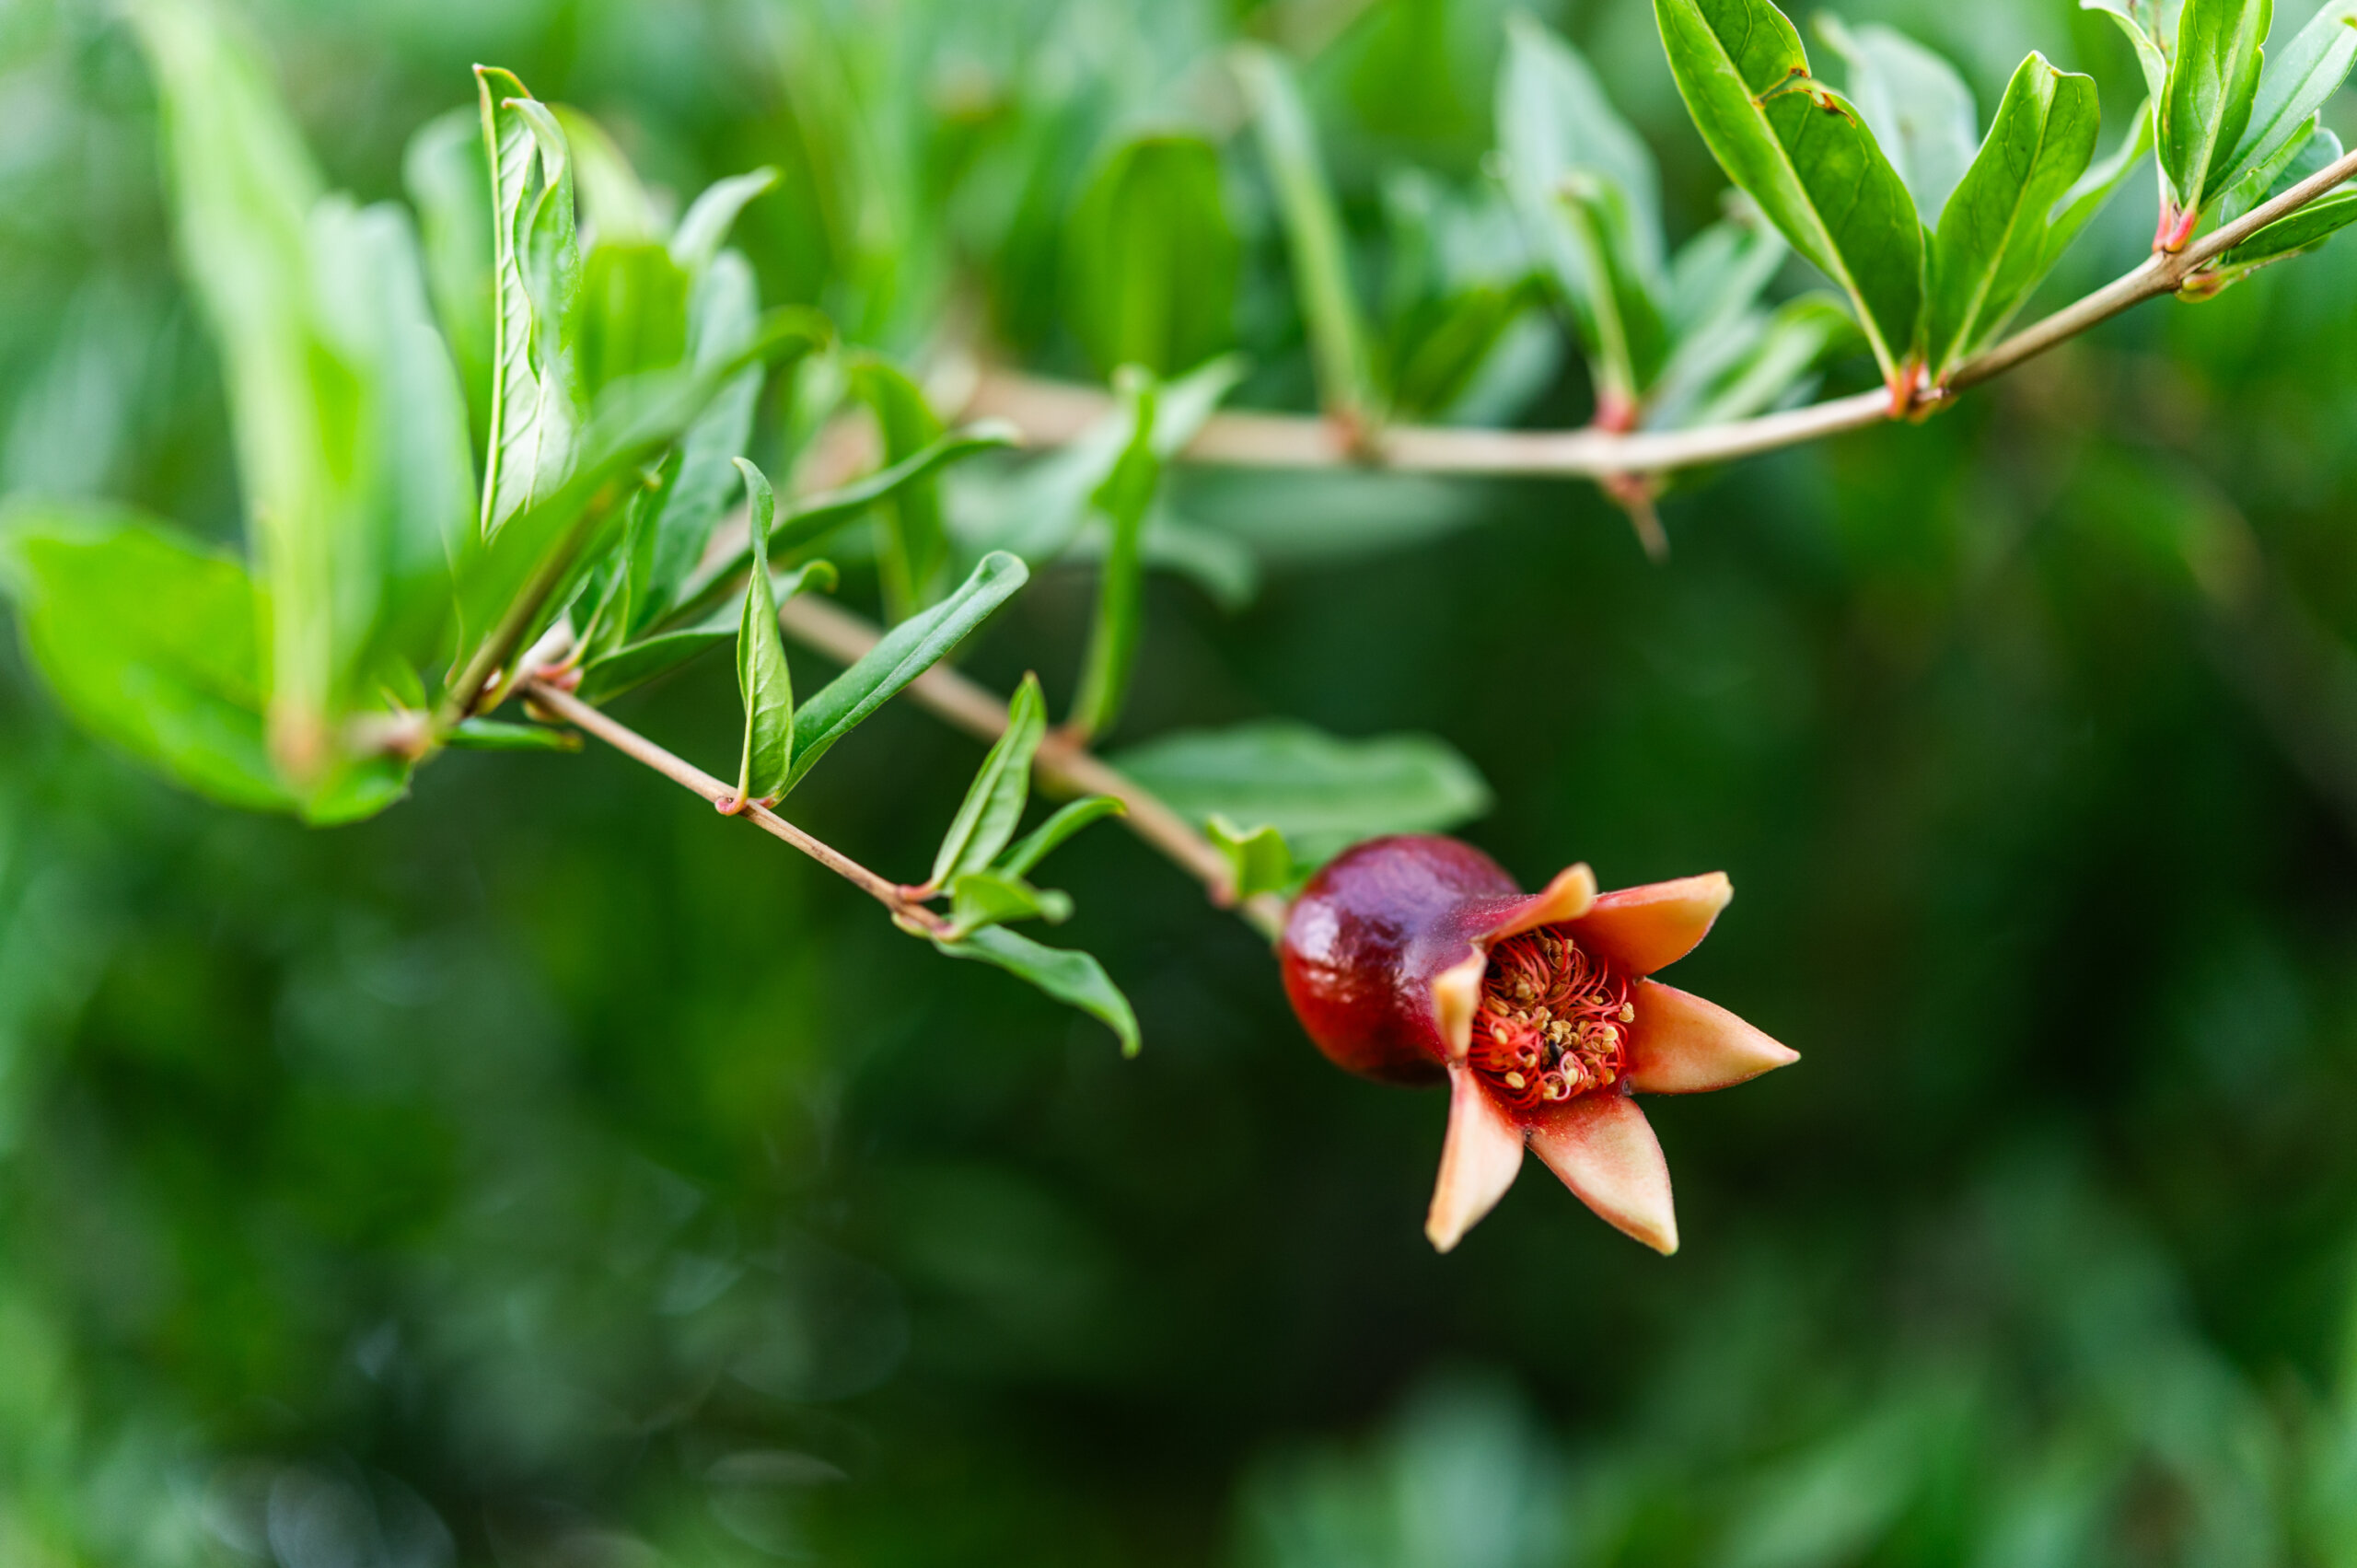 A newly-formed pomegranate sheds its flower pedals as the fruit grows